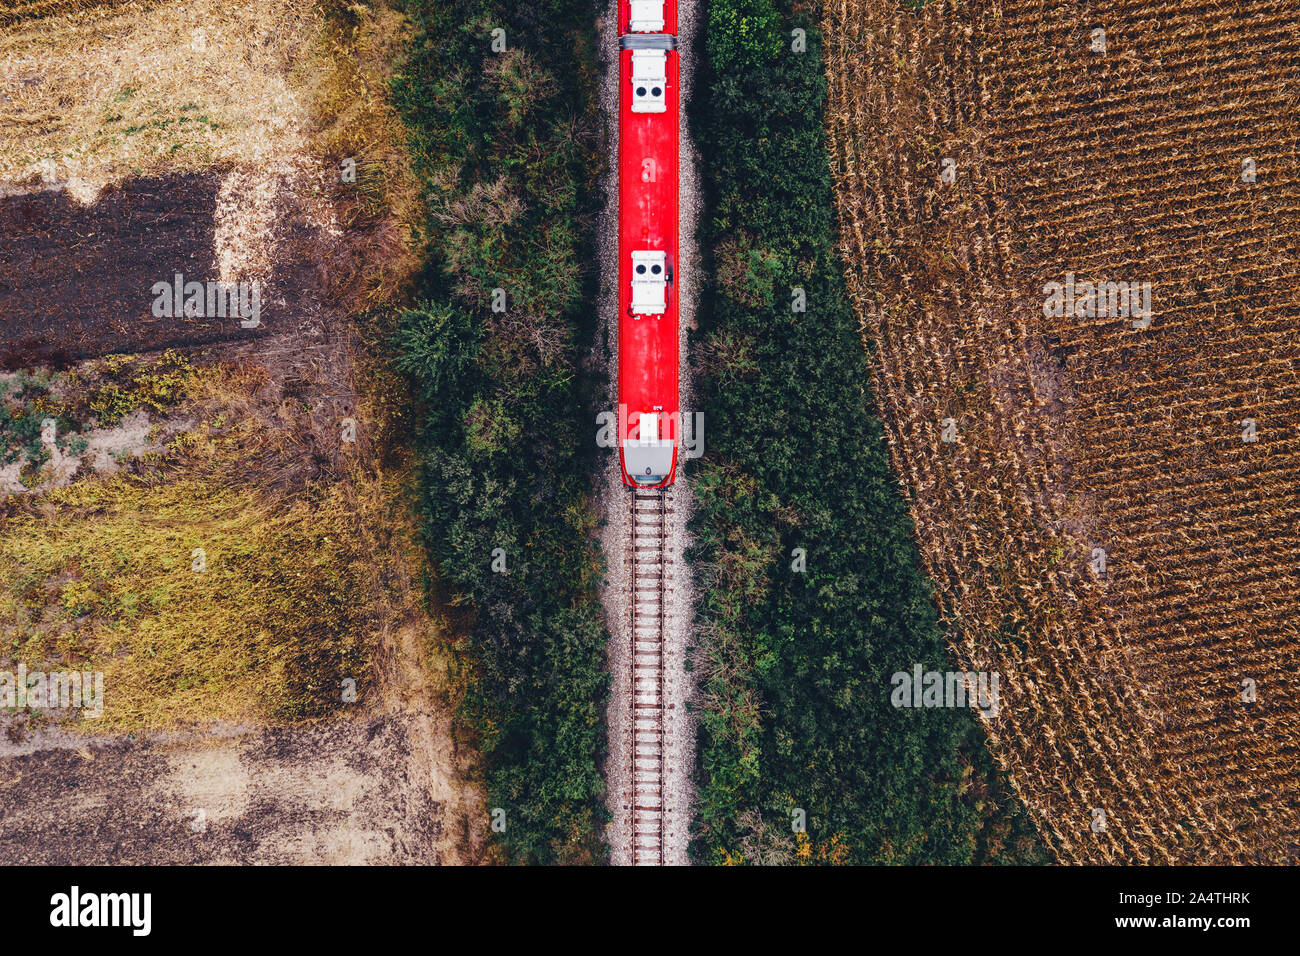 Aerial view of passenger train on railway through autumn countryside landscape, top view from drone pov Stock Photo